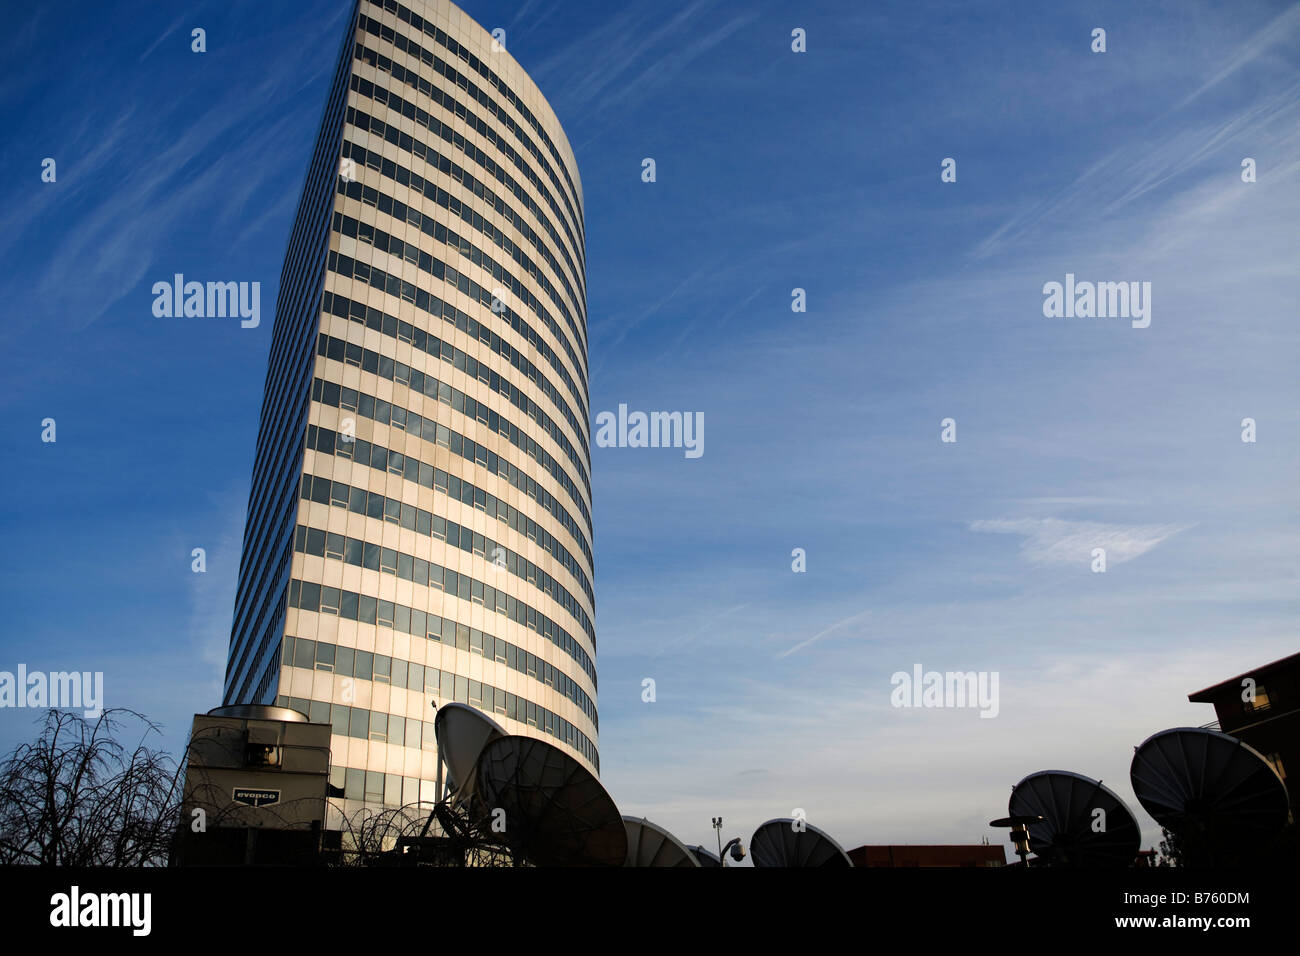 Modern Building and Satellite dishes Stock Photo